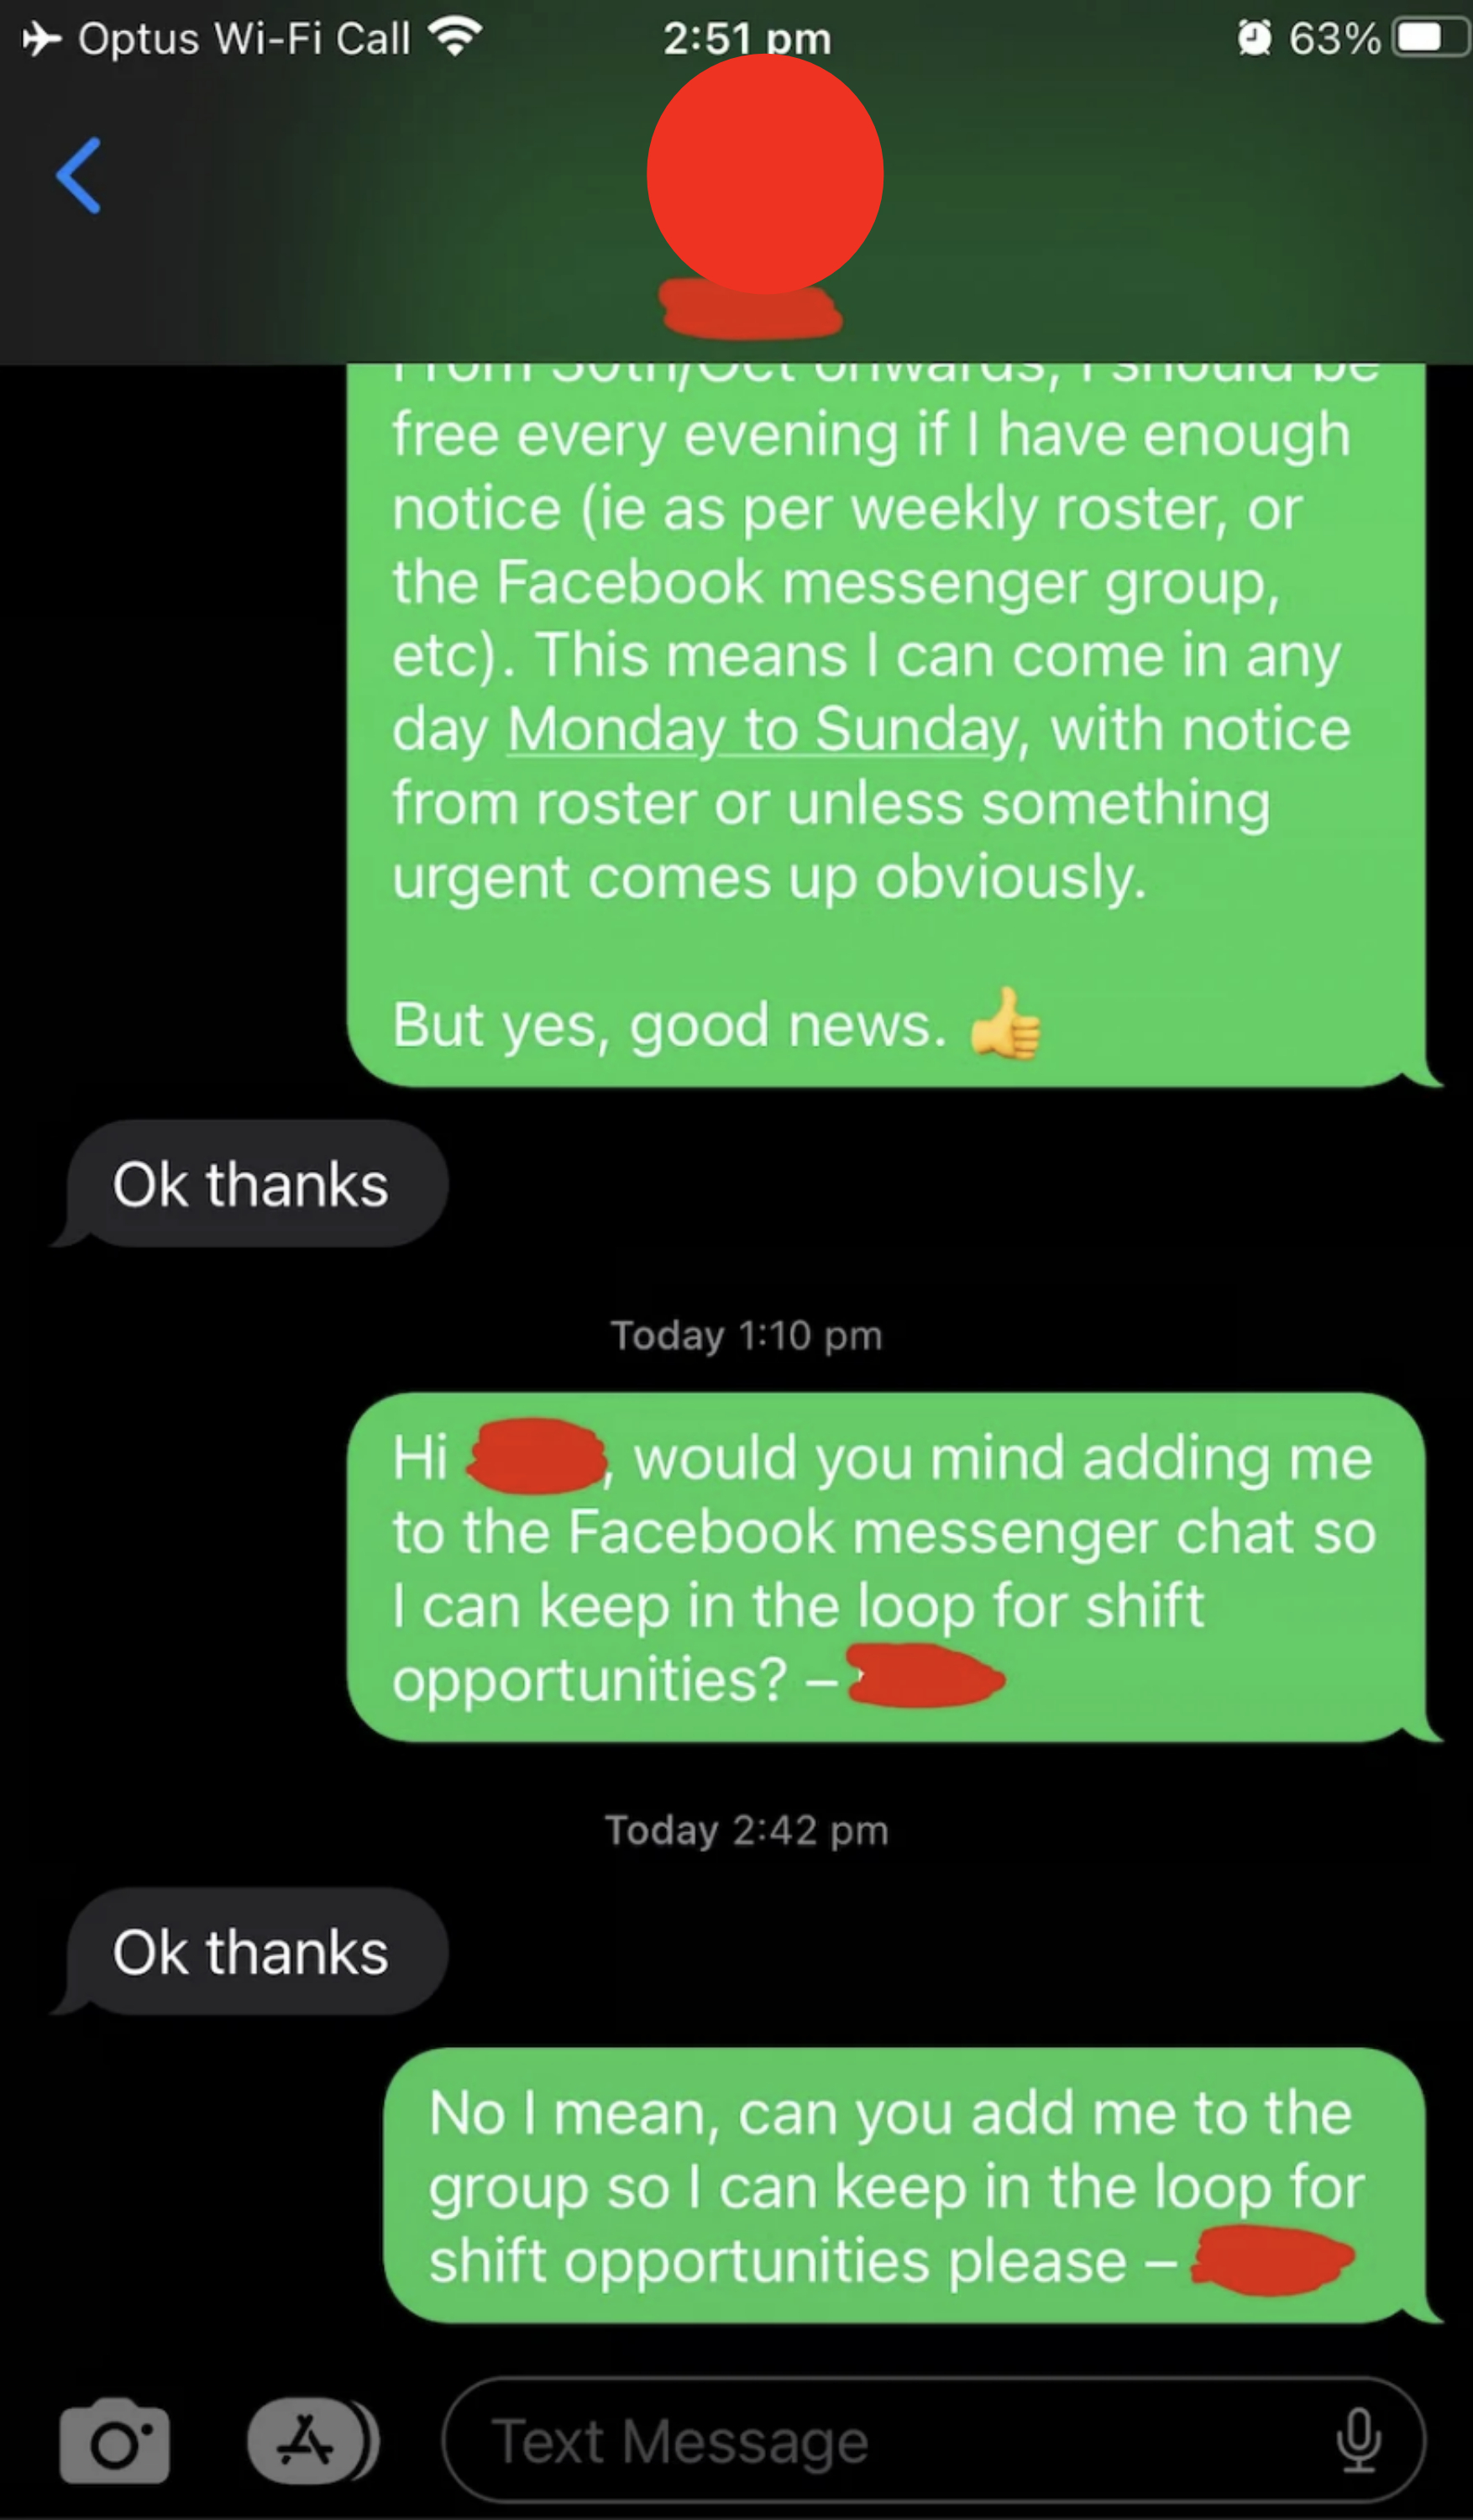 Text conversation about adding a person to a Facebook Messenger chat for shift opportunities, with the question repeated due to lack of clarity